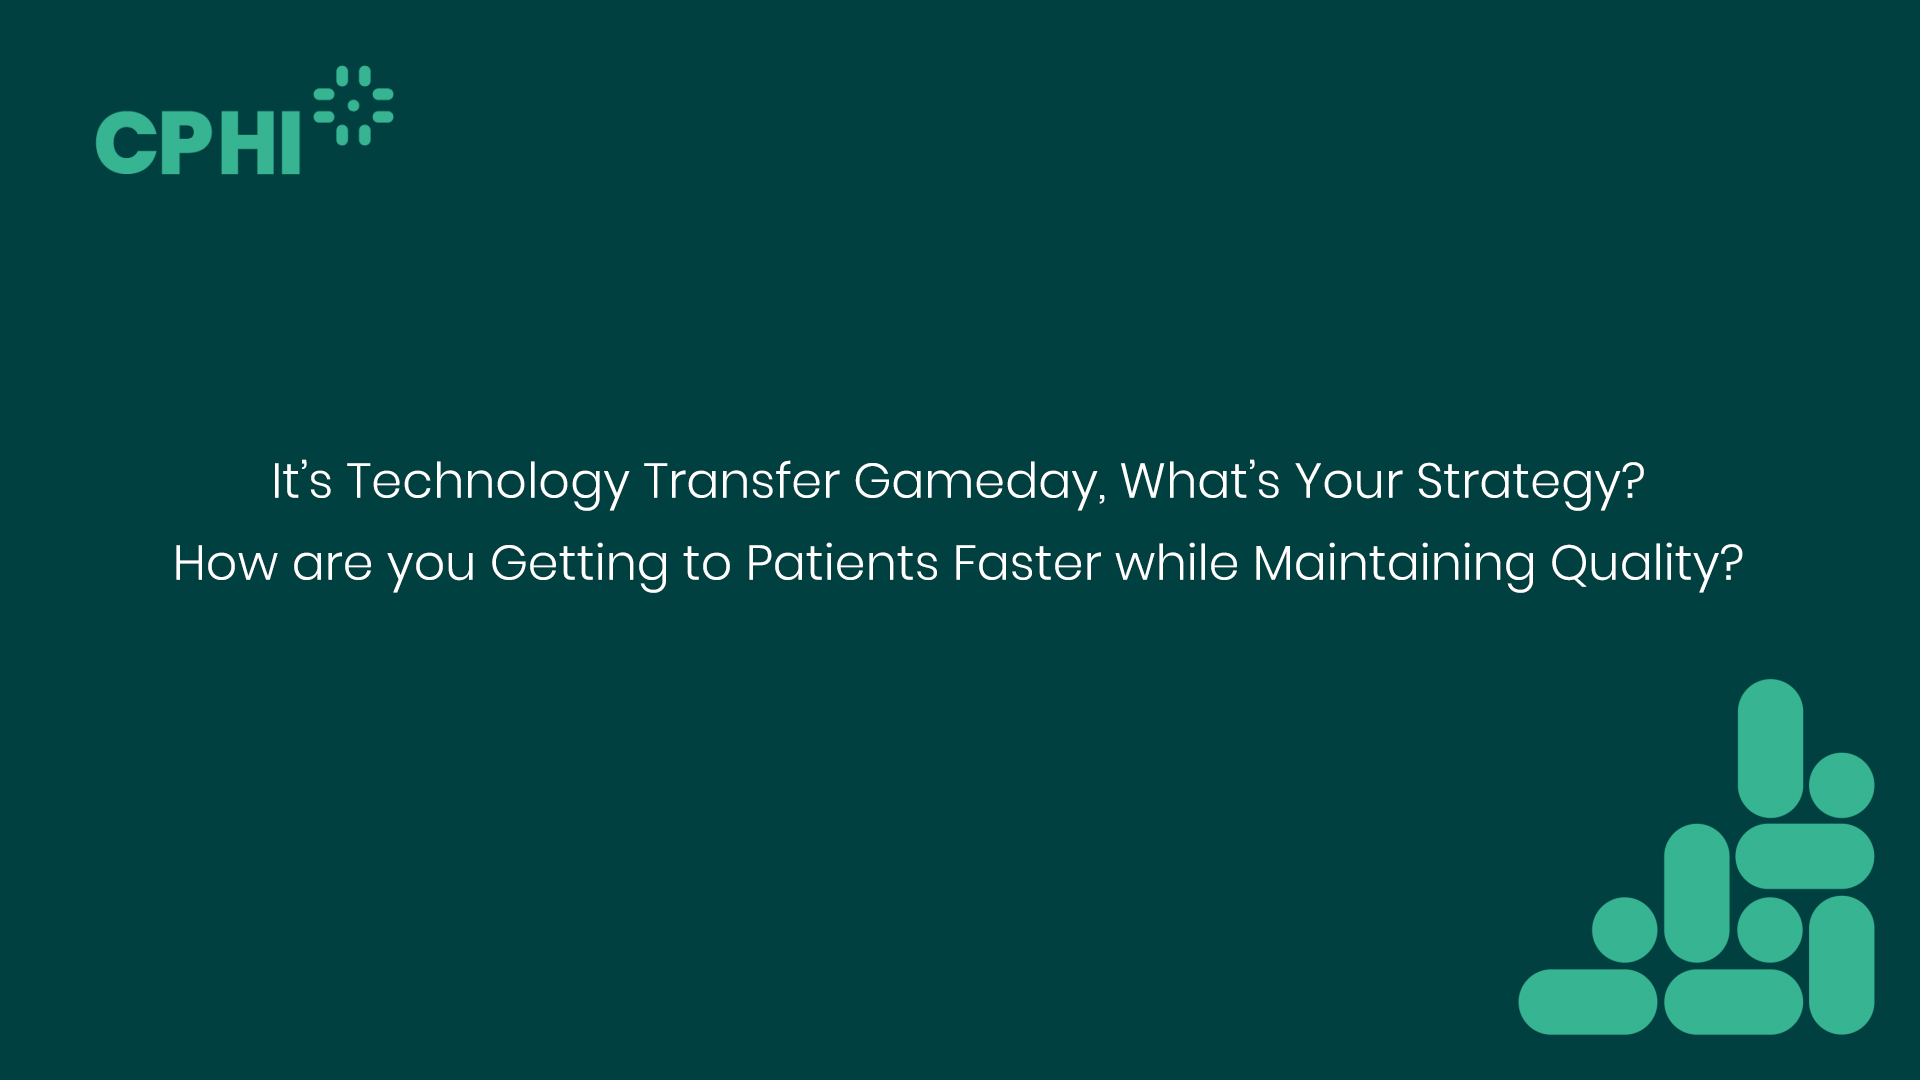 It’s Technology Transfer Gameday, What’s Your Strategy? How are you Getting to Patients Faster while Maintaining Quality?